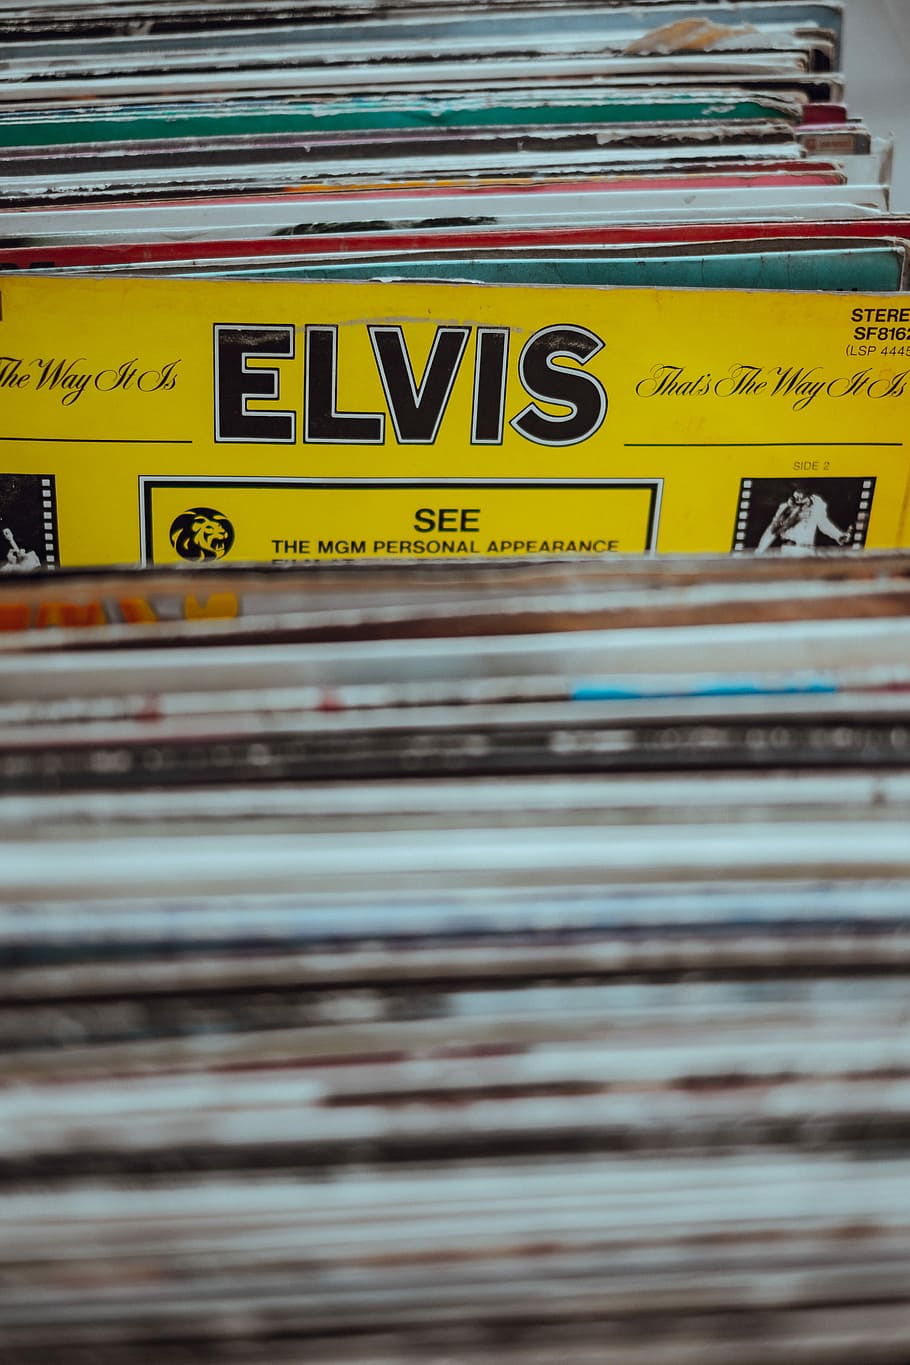 Elvis vinyl sleeve, assorted music sleeves, record, record collection